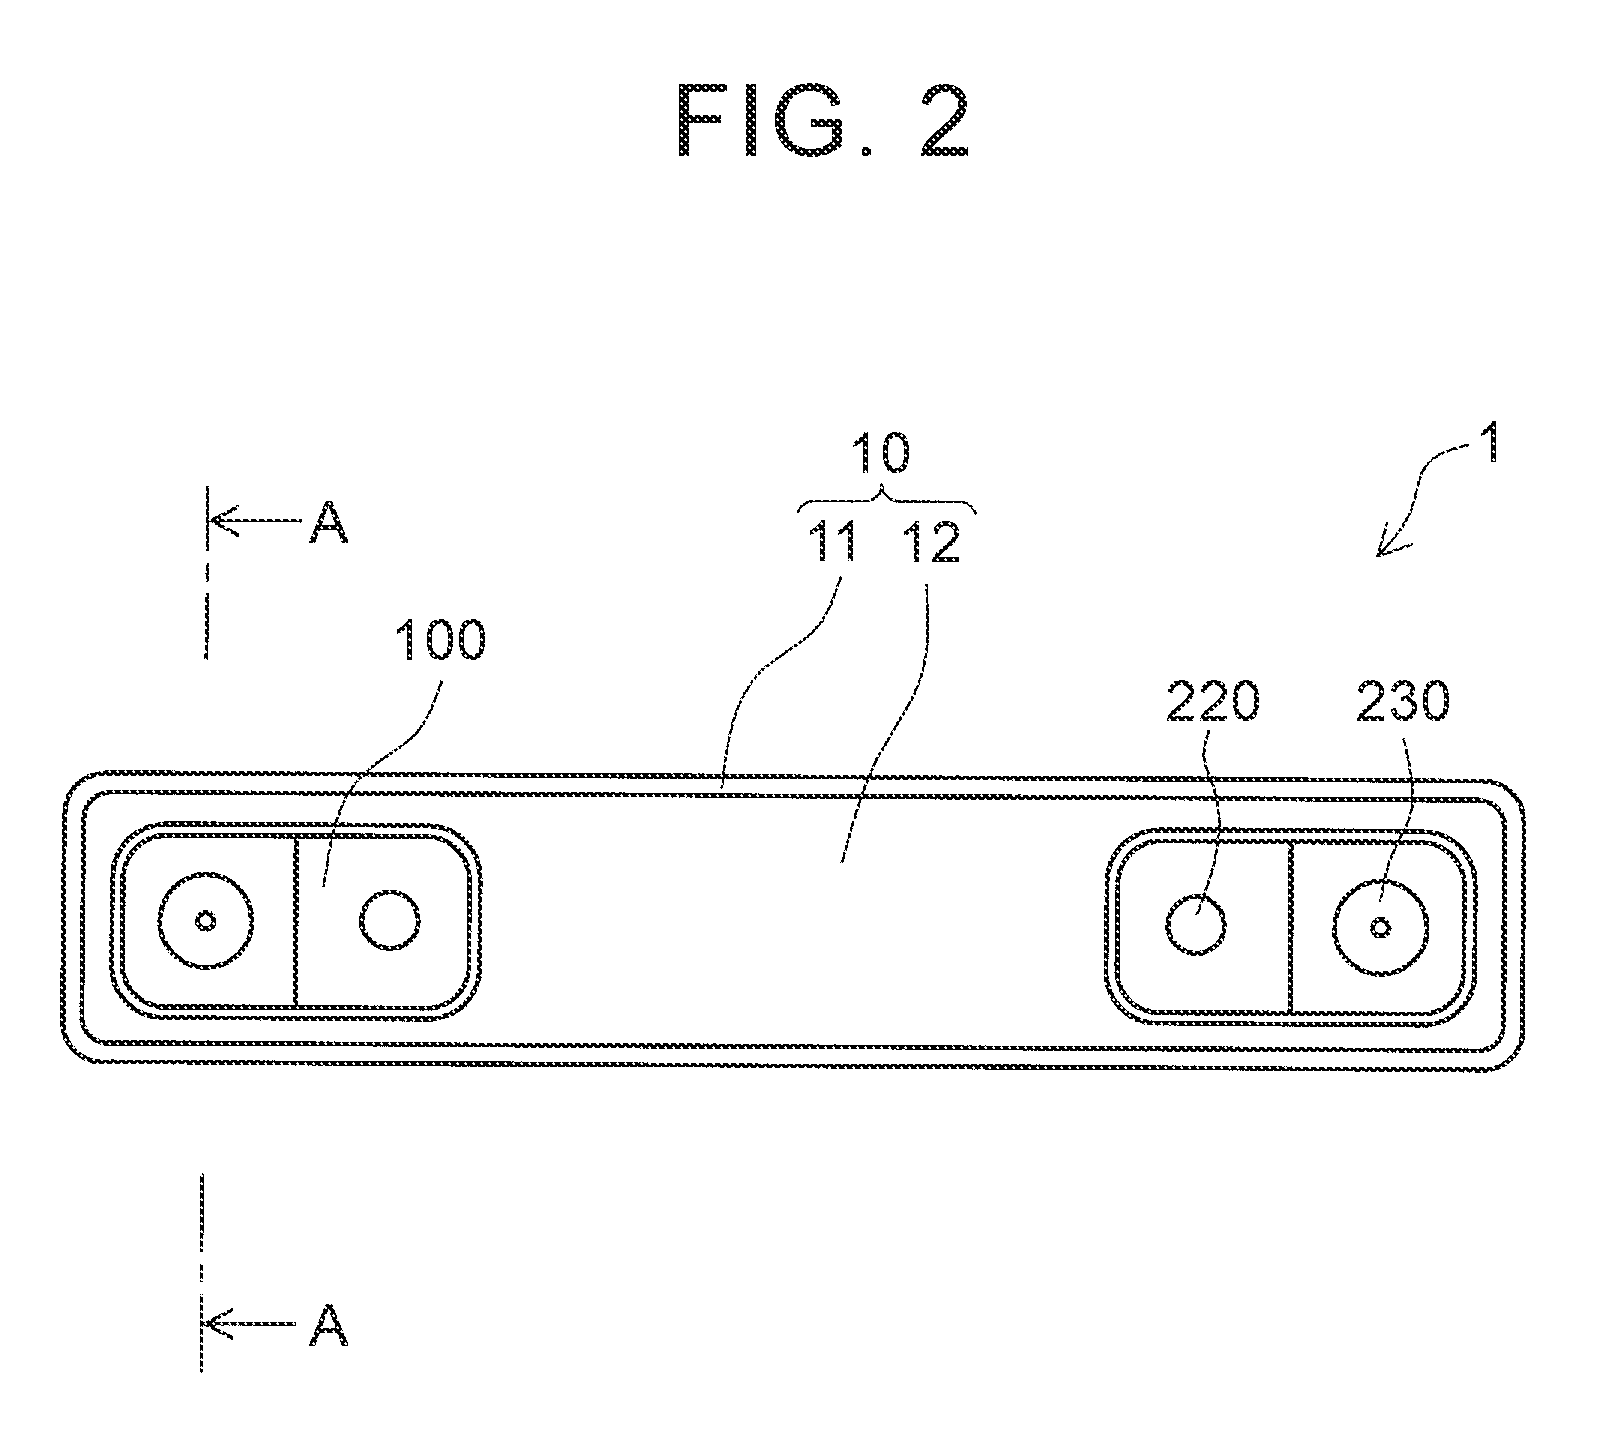 Producing method of sealed battery